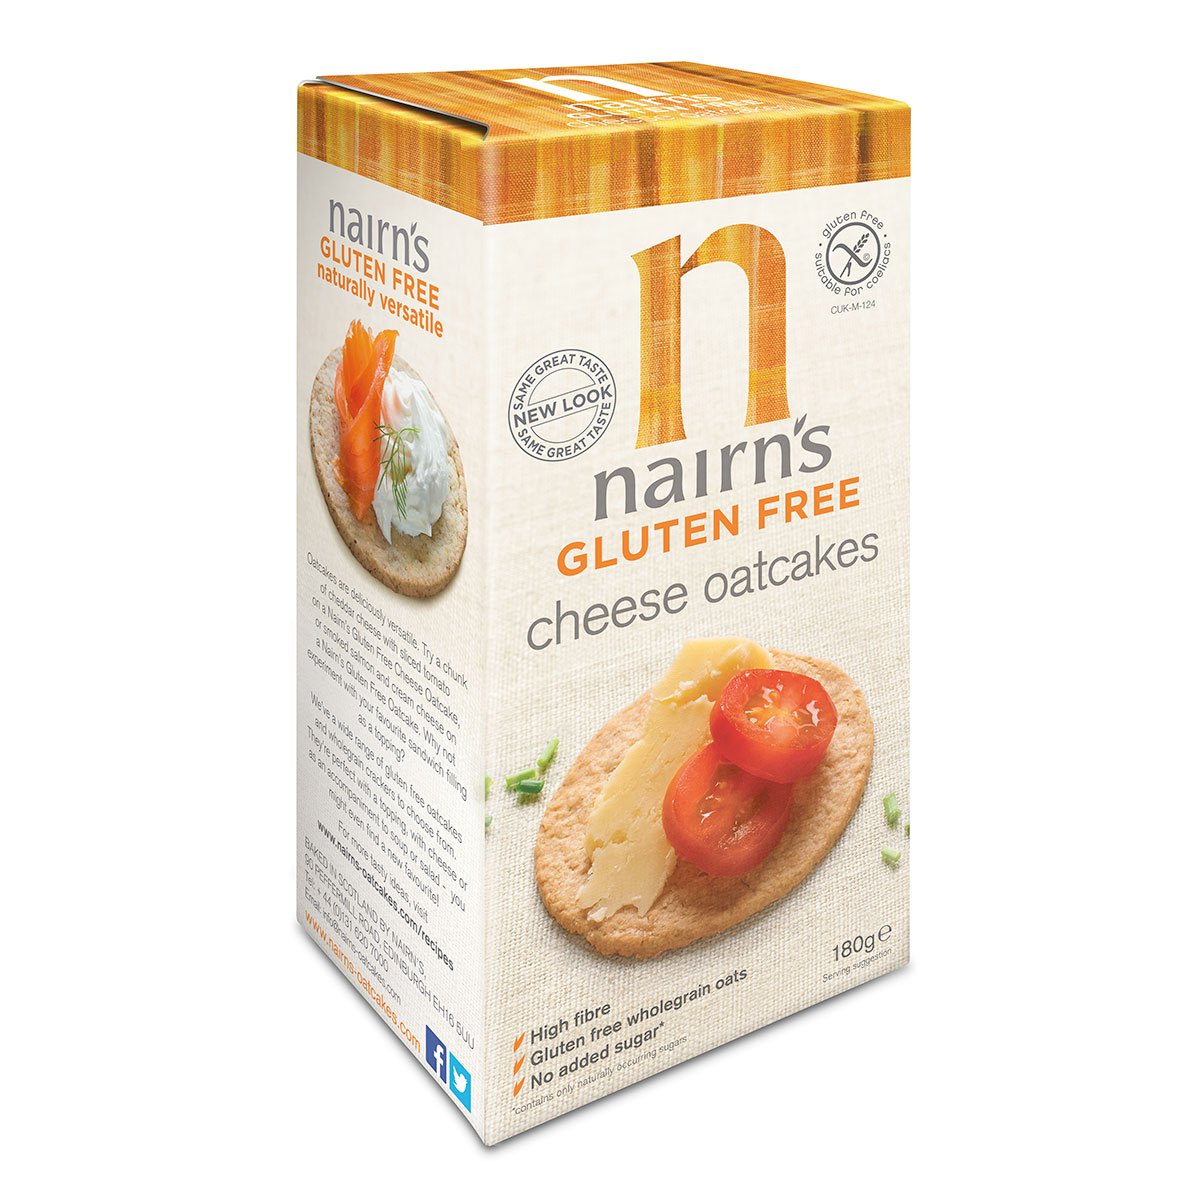 Nairns Gluten Free Cheese Oatcakes 180g - Just Natural